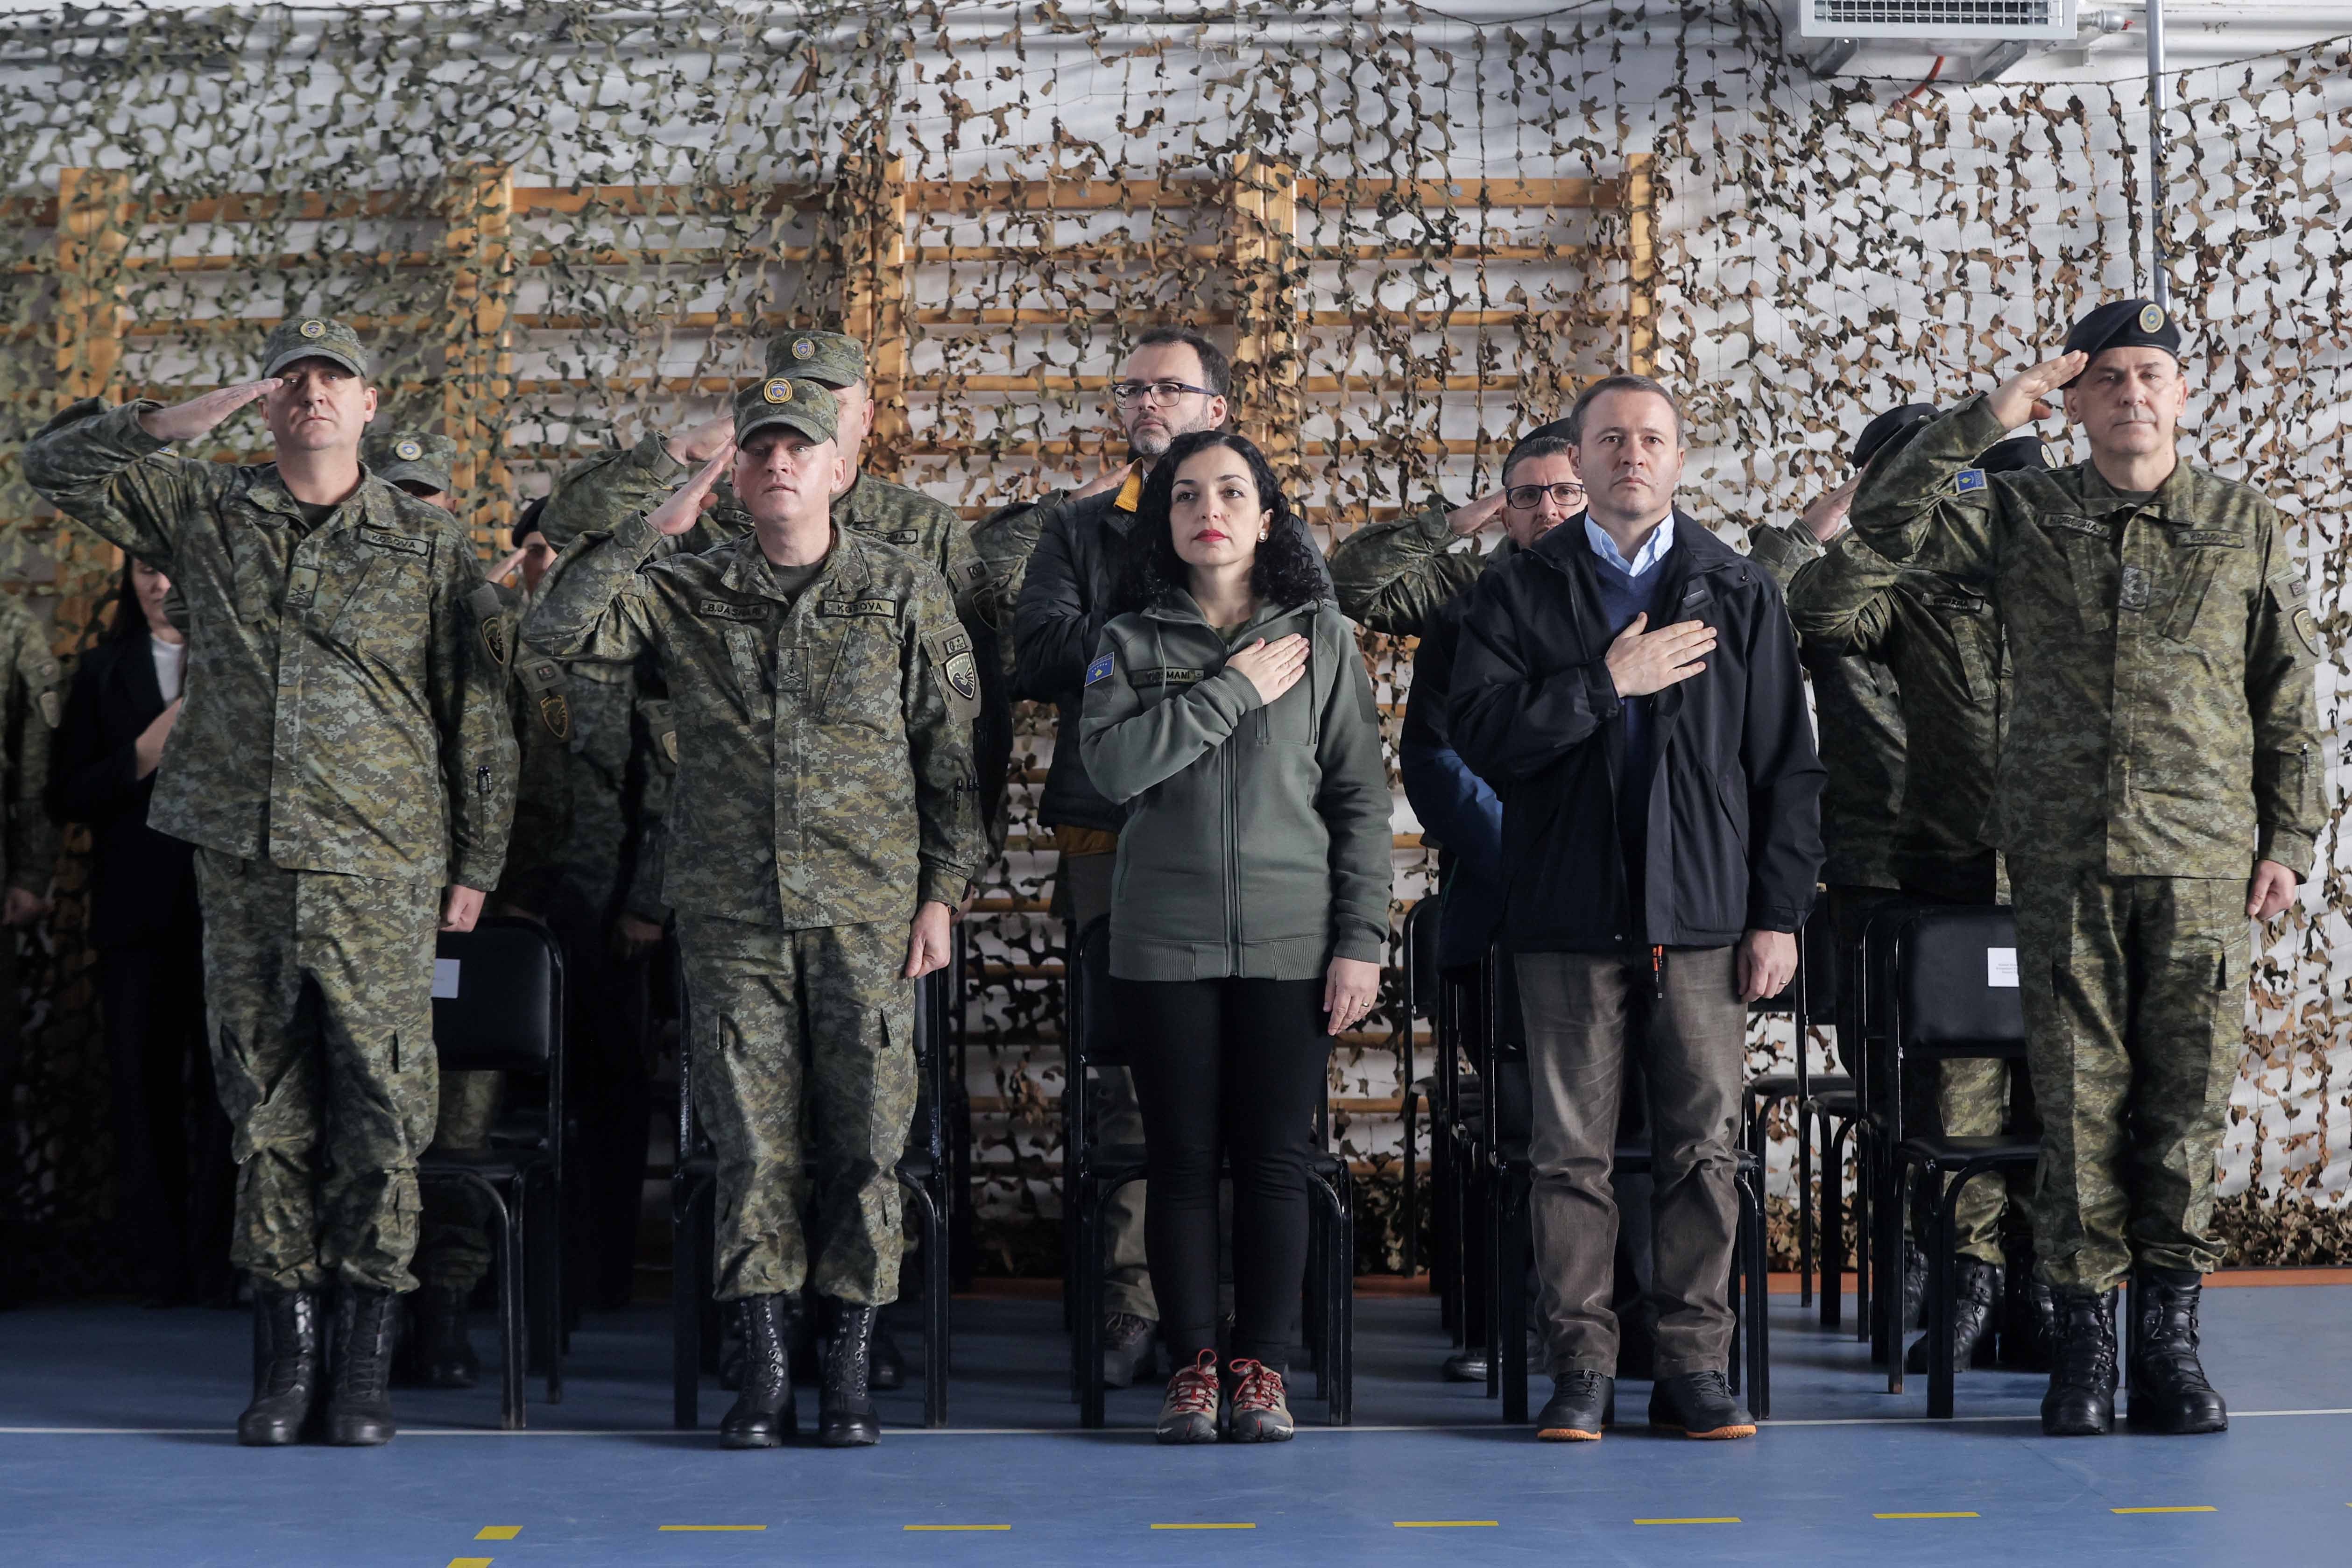 President Osmani's annual address to the Kosovo Security Force at the Ground Forces Command in Istog